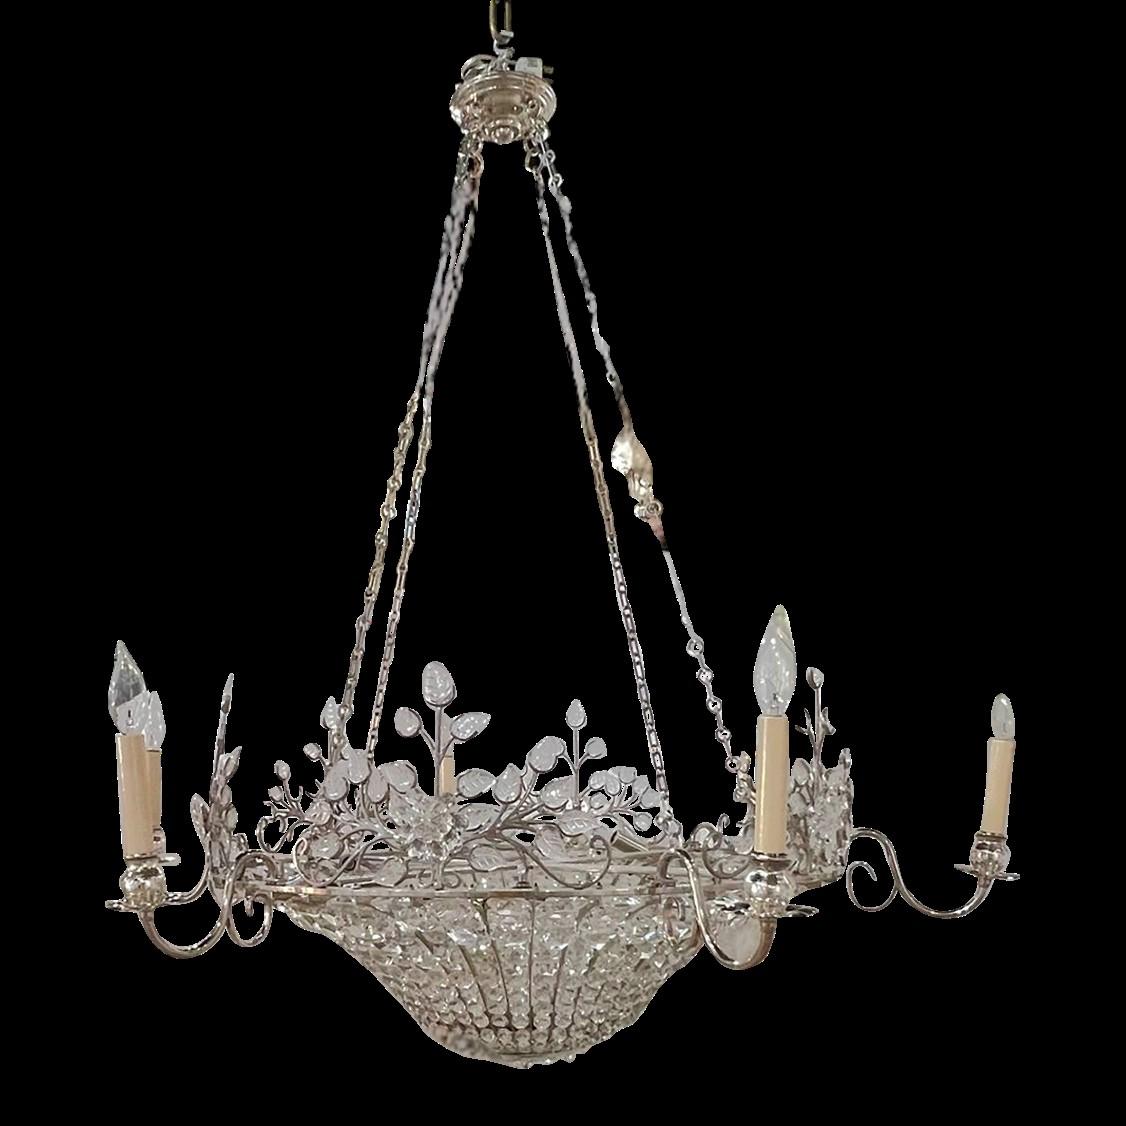 A circa 1930's French silver plated chandelier with crystals and glass leaves  12 interior lights